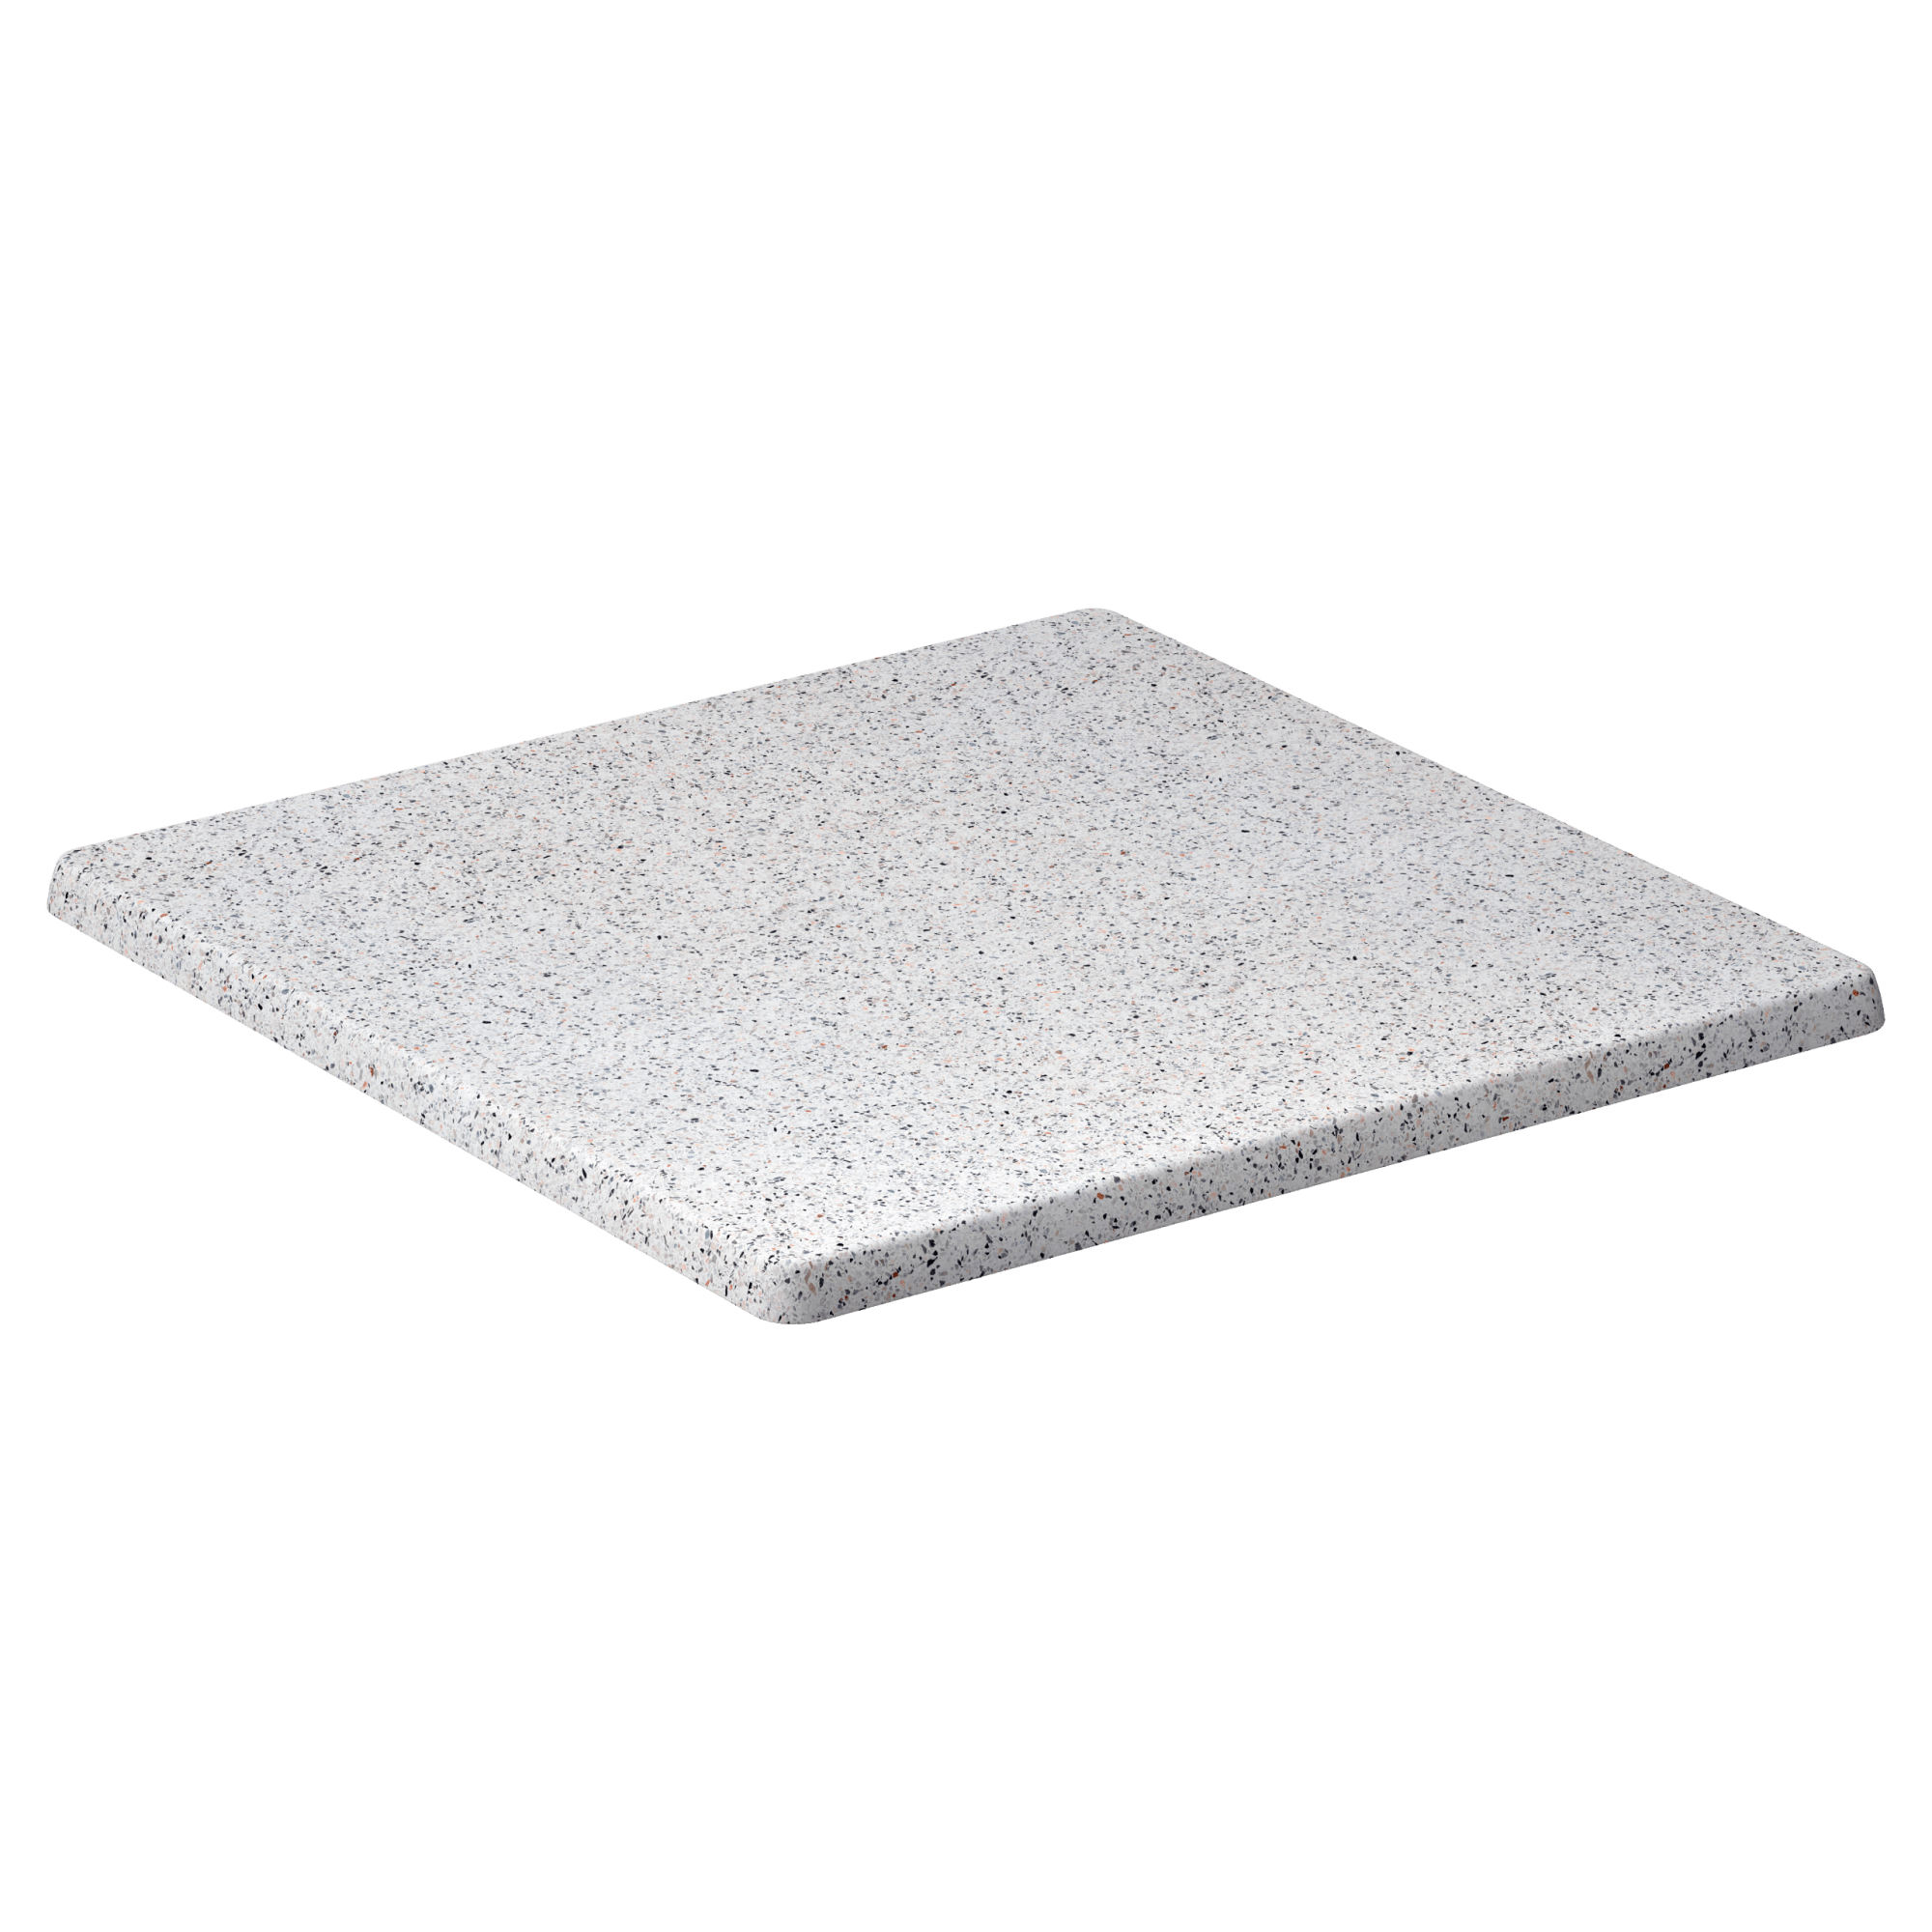 Resin Table Top in Terrazzo Pietra Finish with Resin Table Top in Terrazzo Pietra Finish